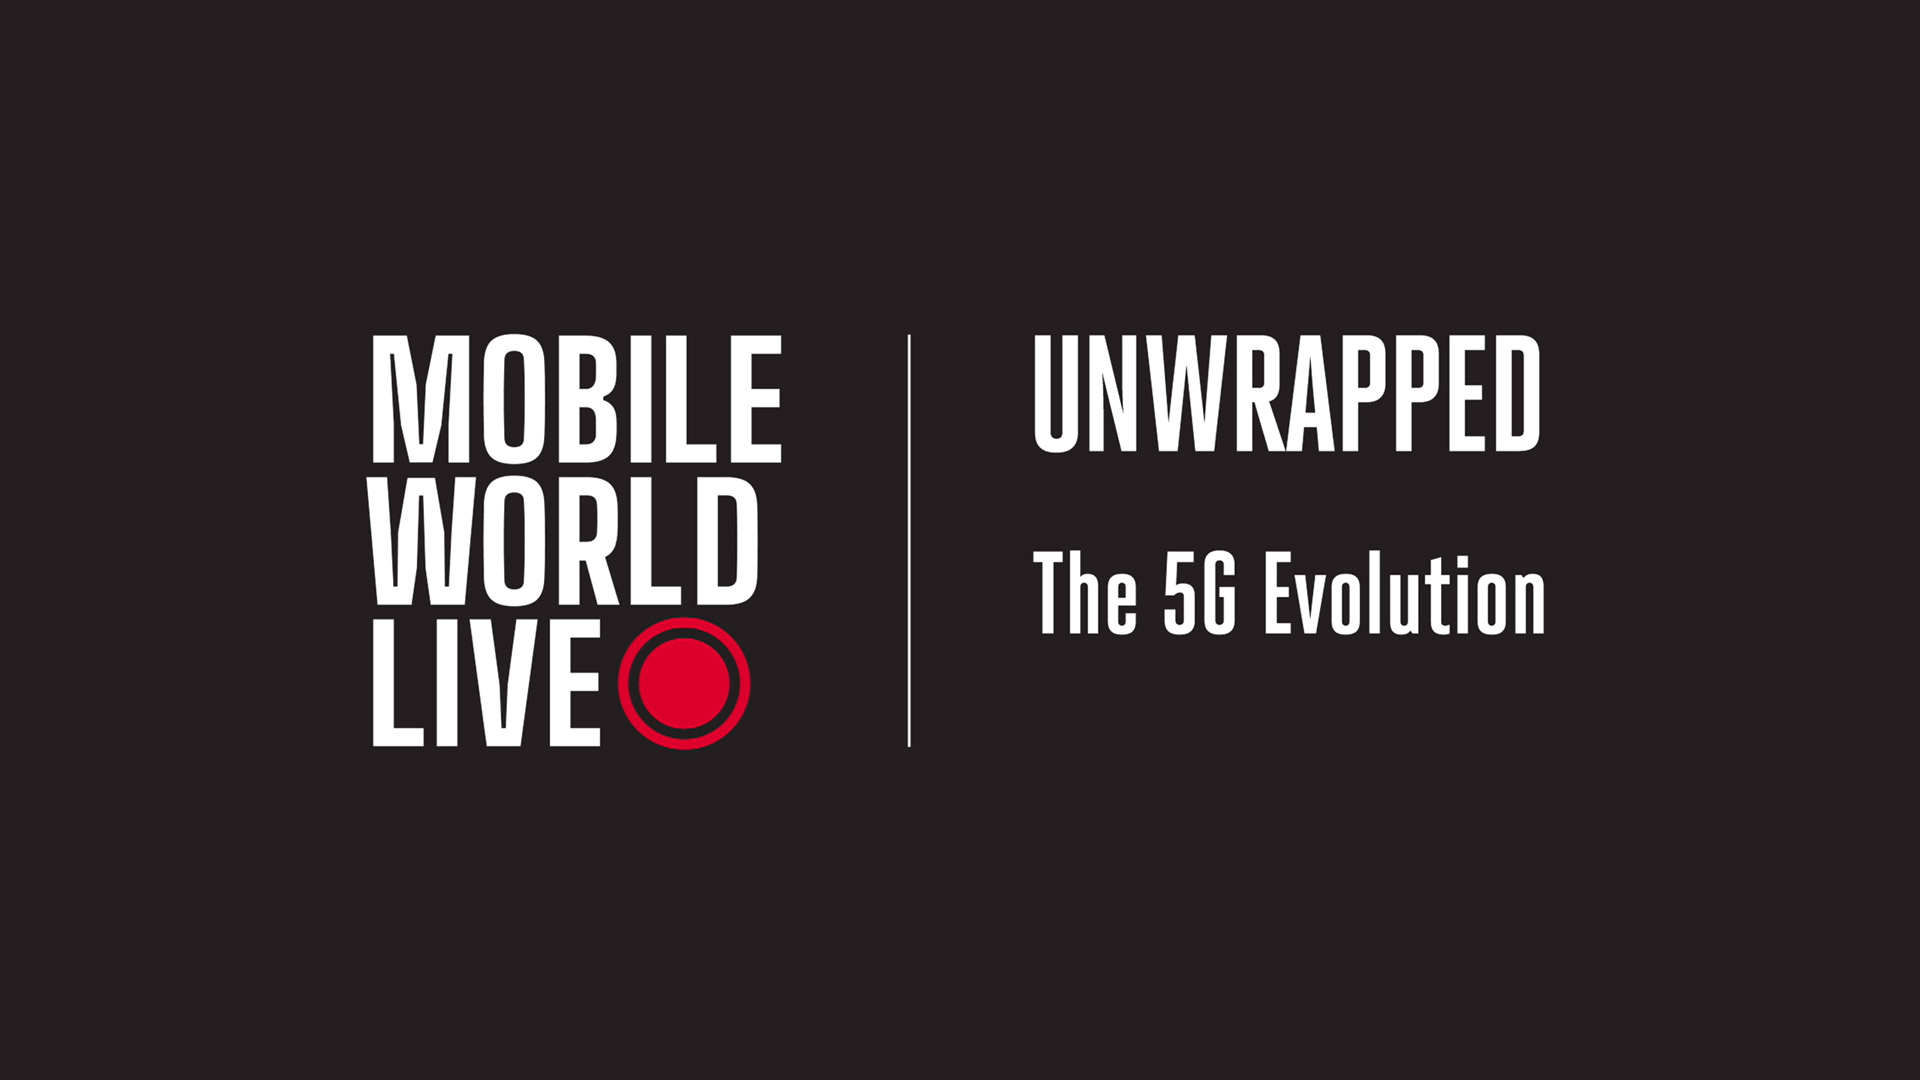 MWL Unwrapped 5G Evolution graphic